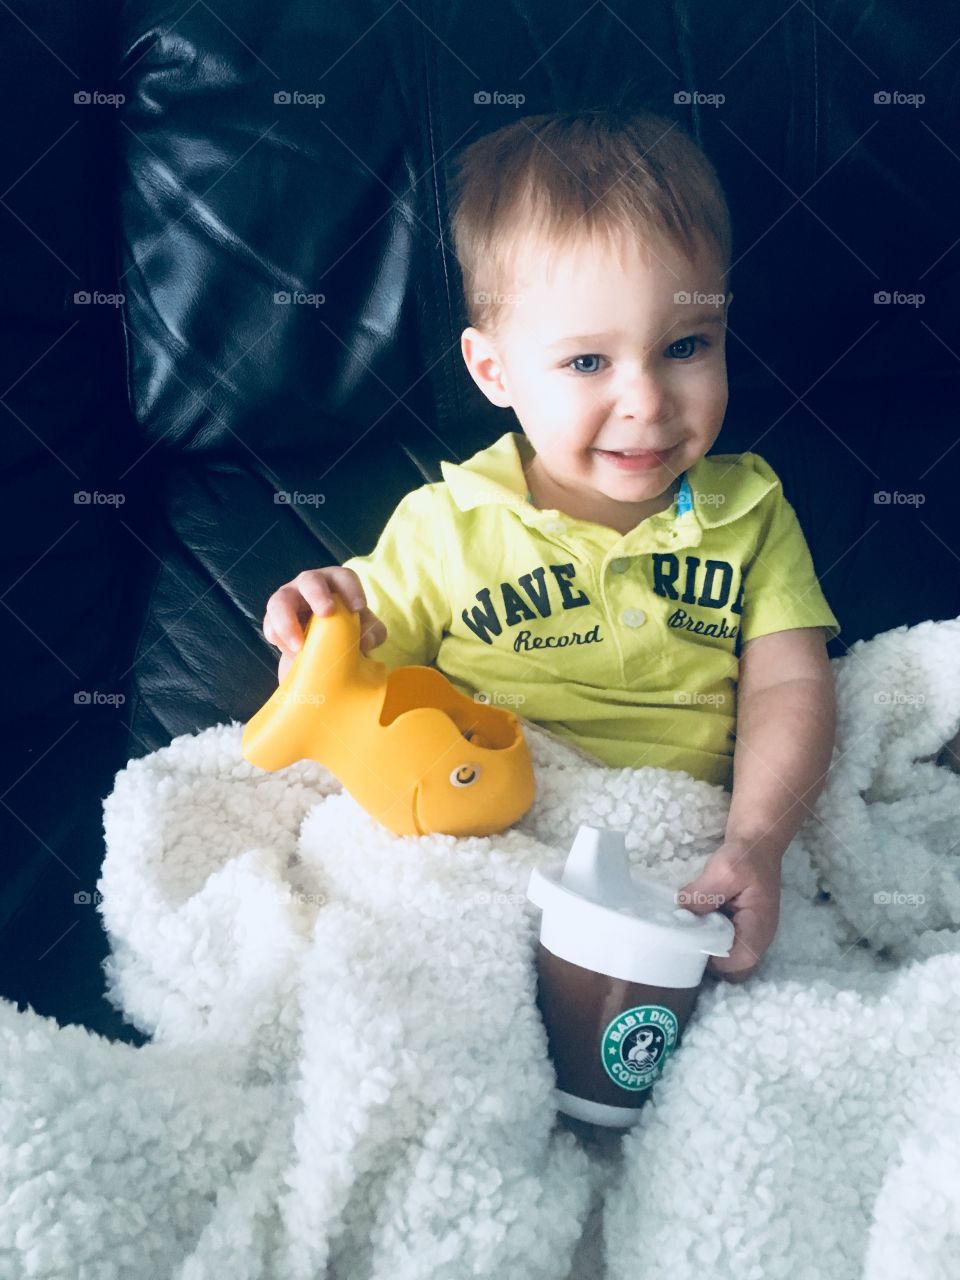 “Baby Ducks” Starbucks sippy cup was quite the hit with our son!